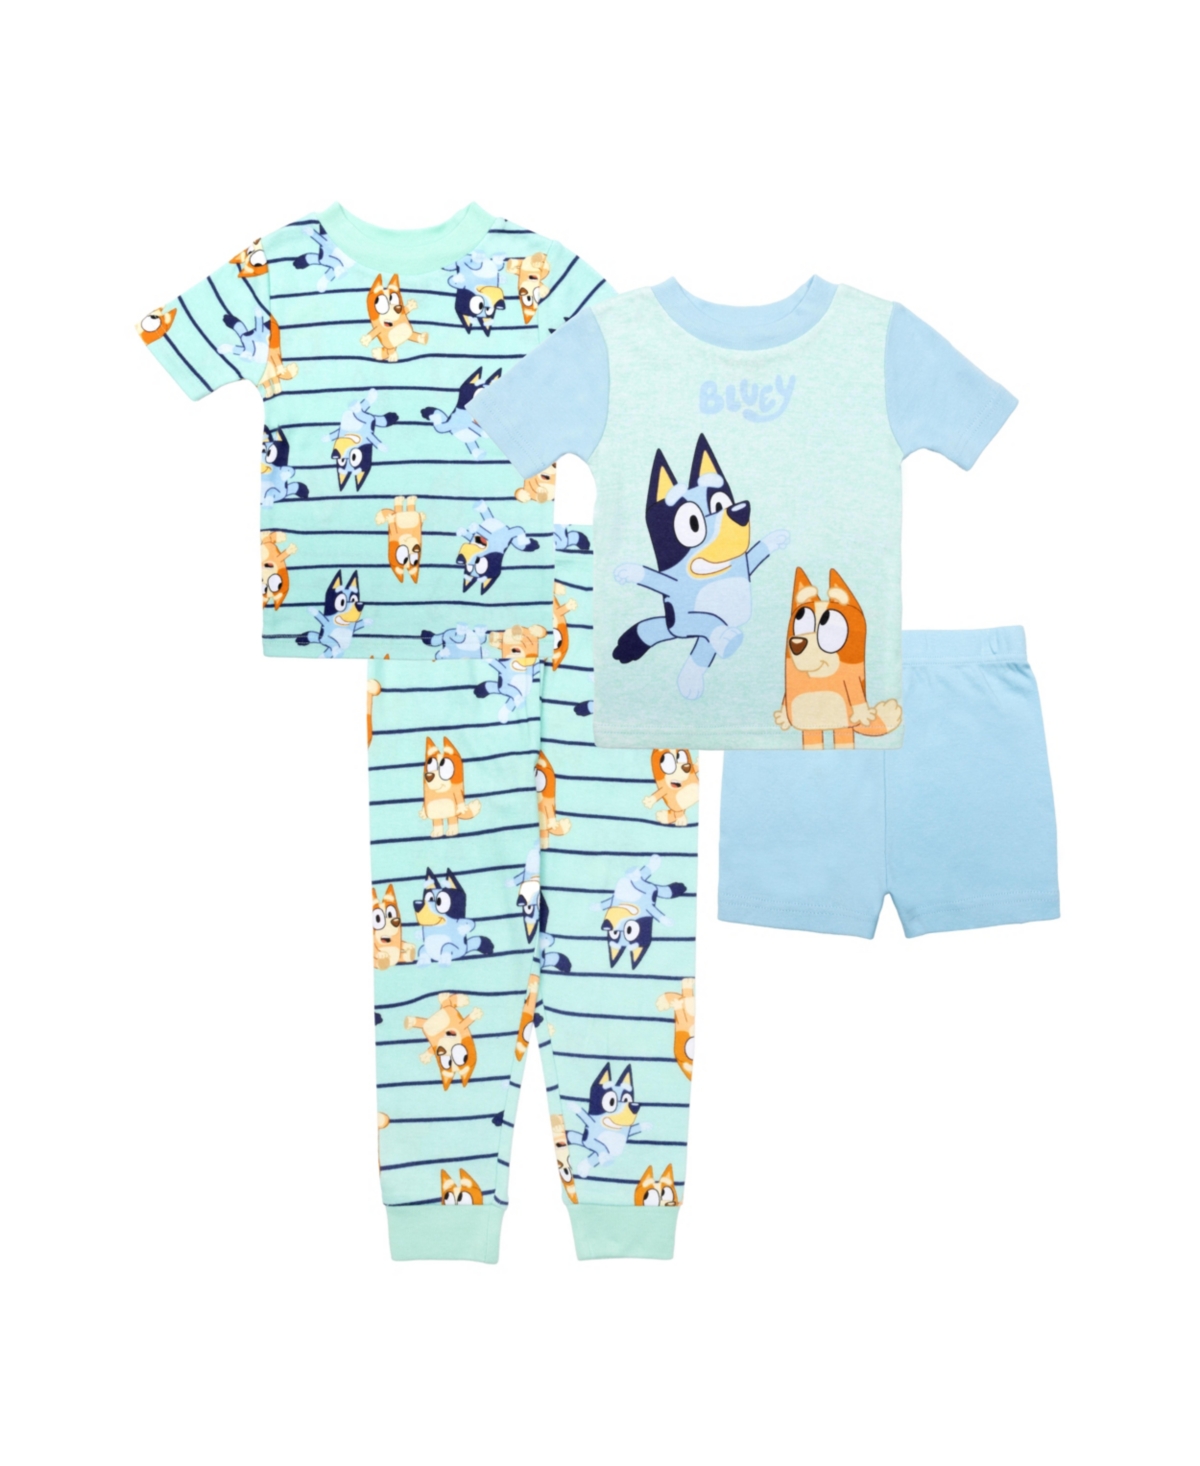 Shop Bluey Toddler Boys Top And Pajama, 4 Piece Set In Assorted